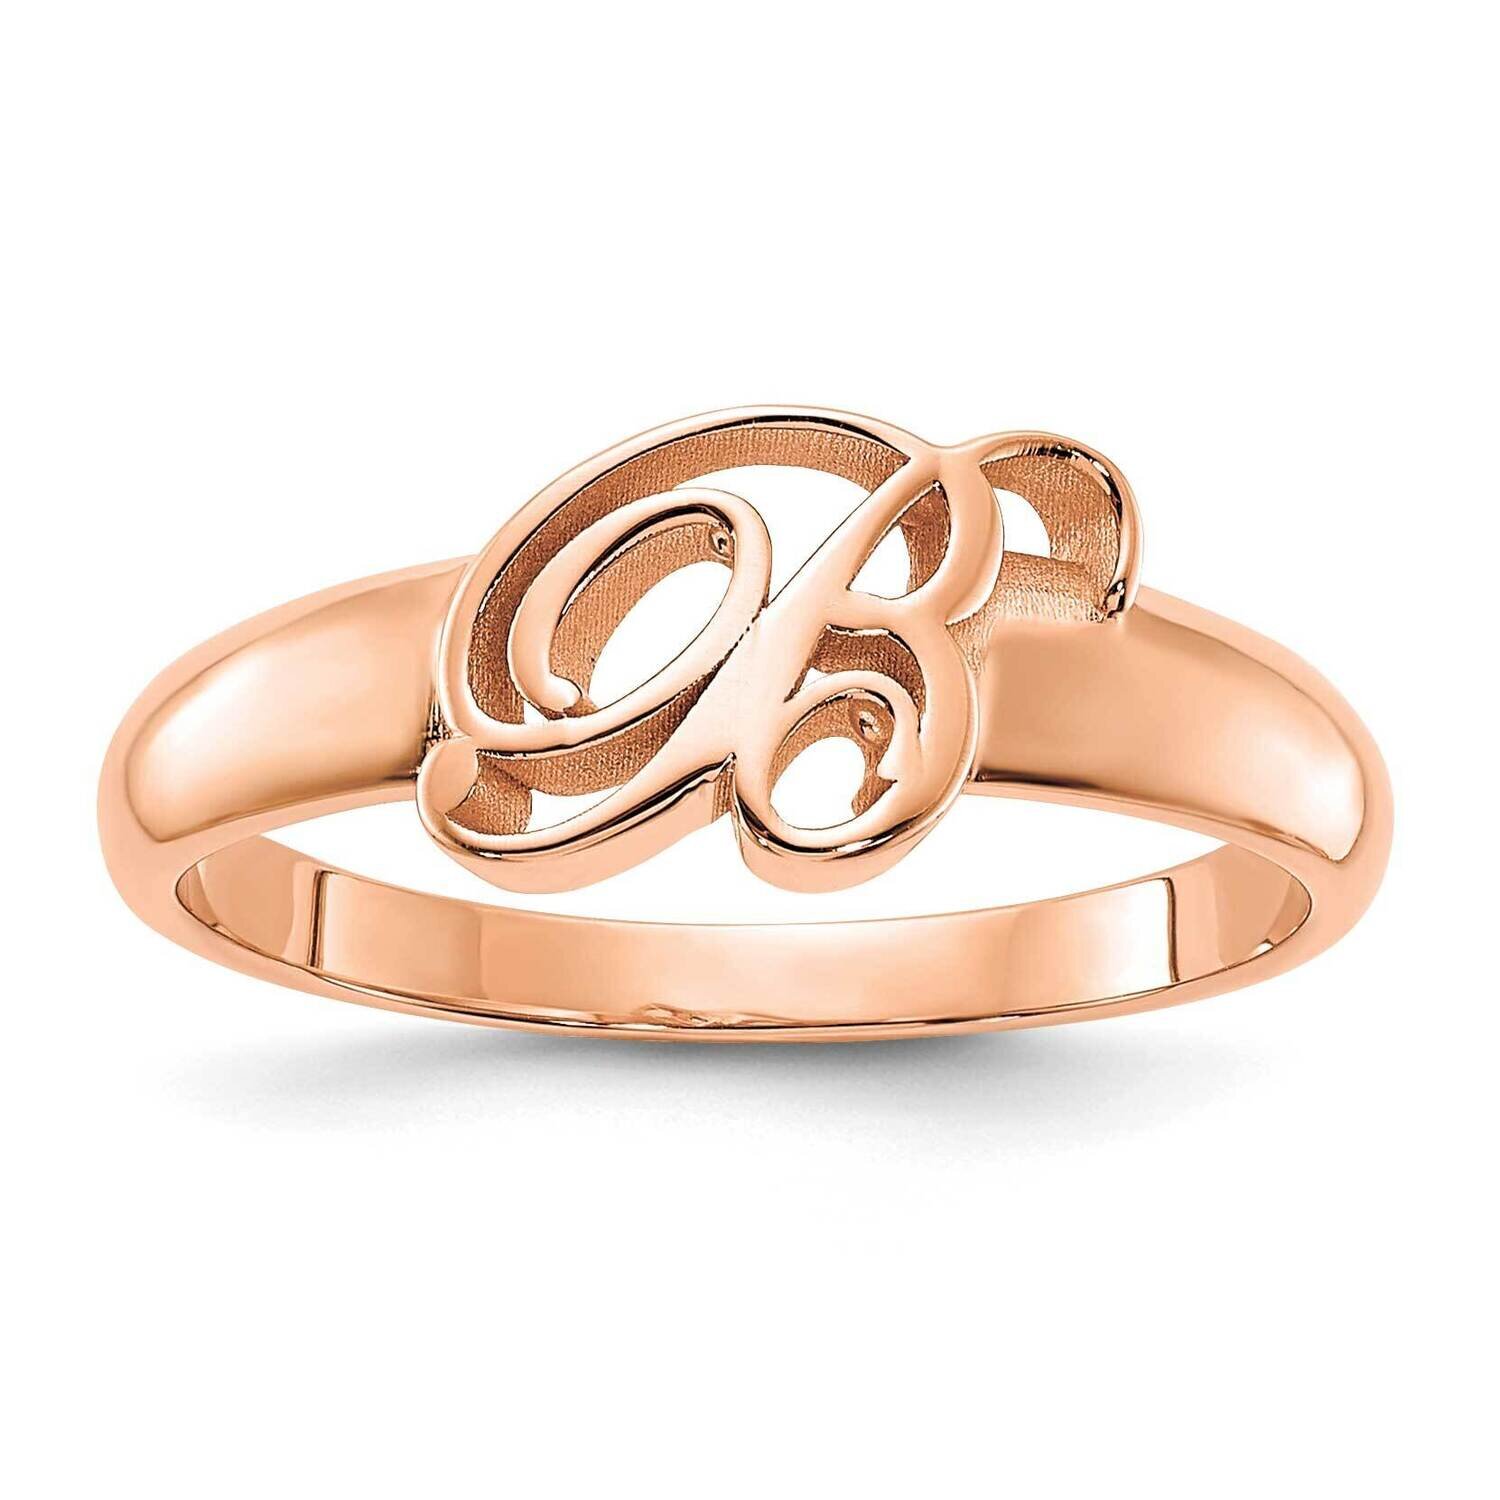 Initial Ring 14k Rose Gold Polished XNR65R